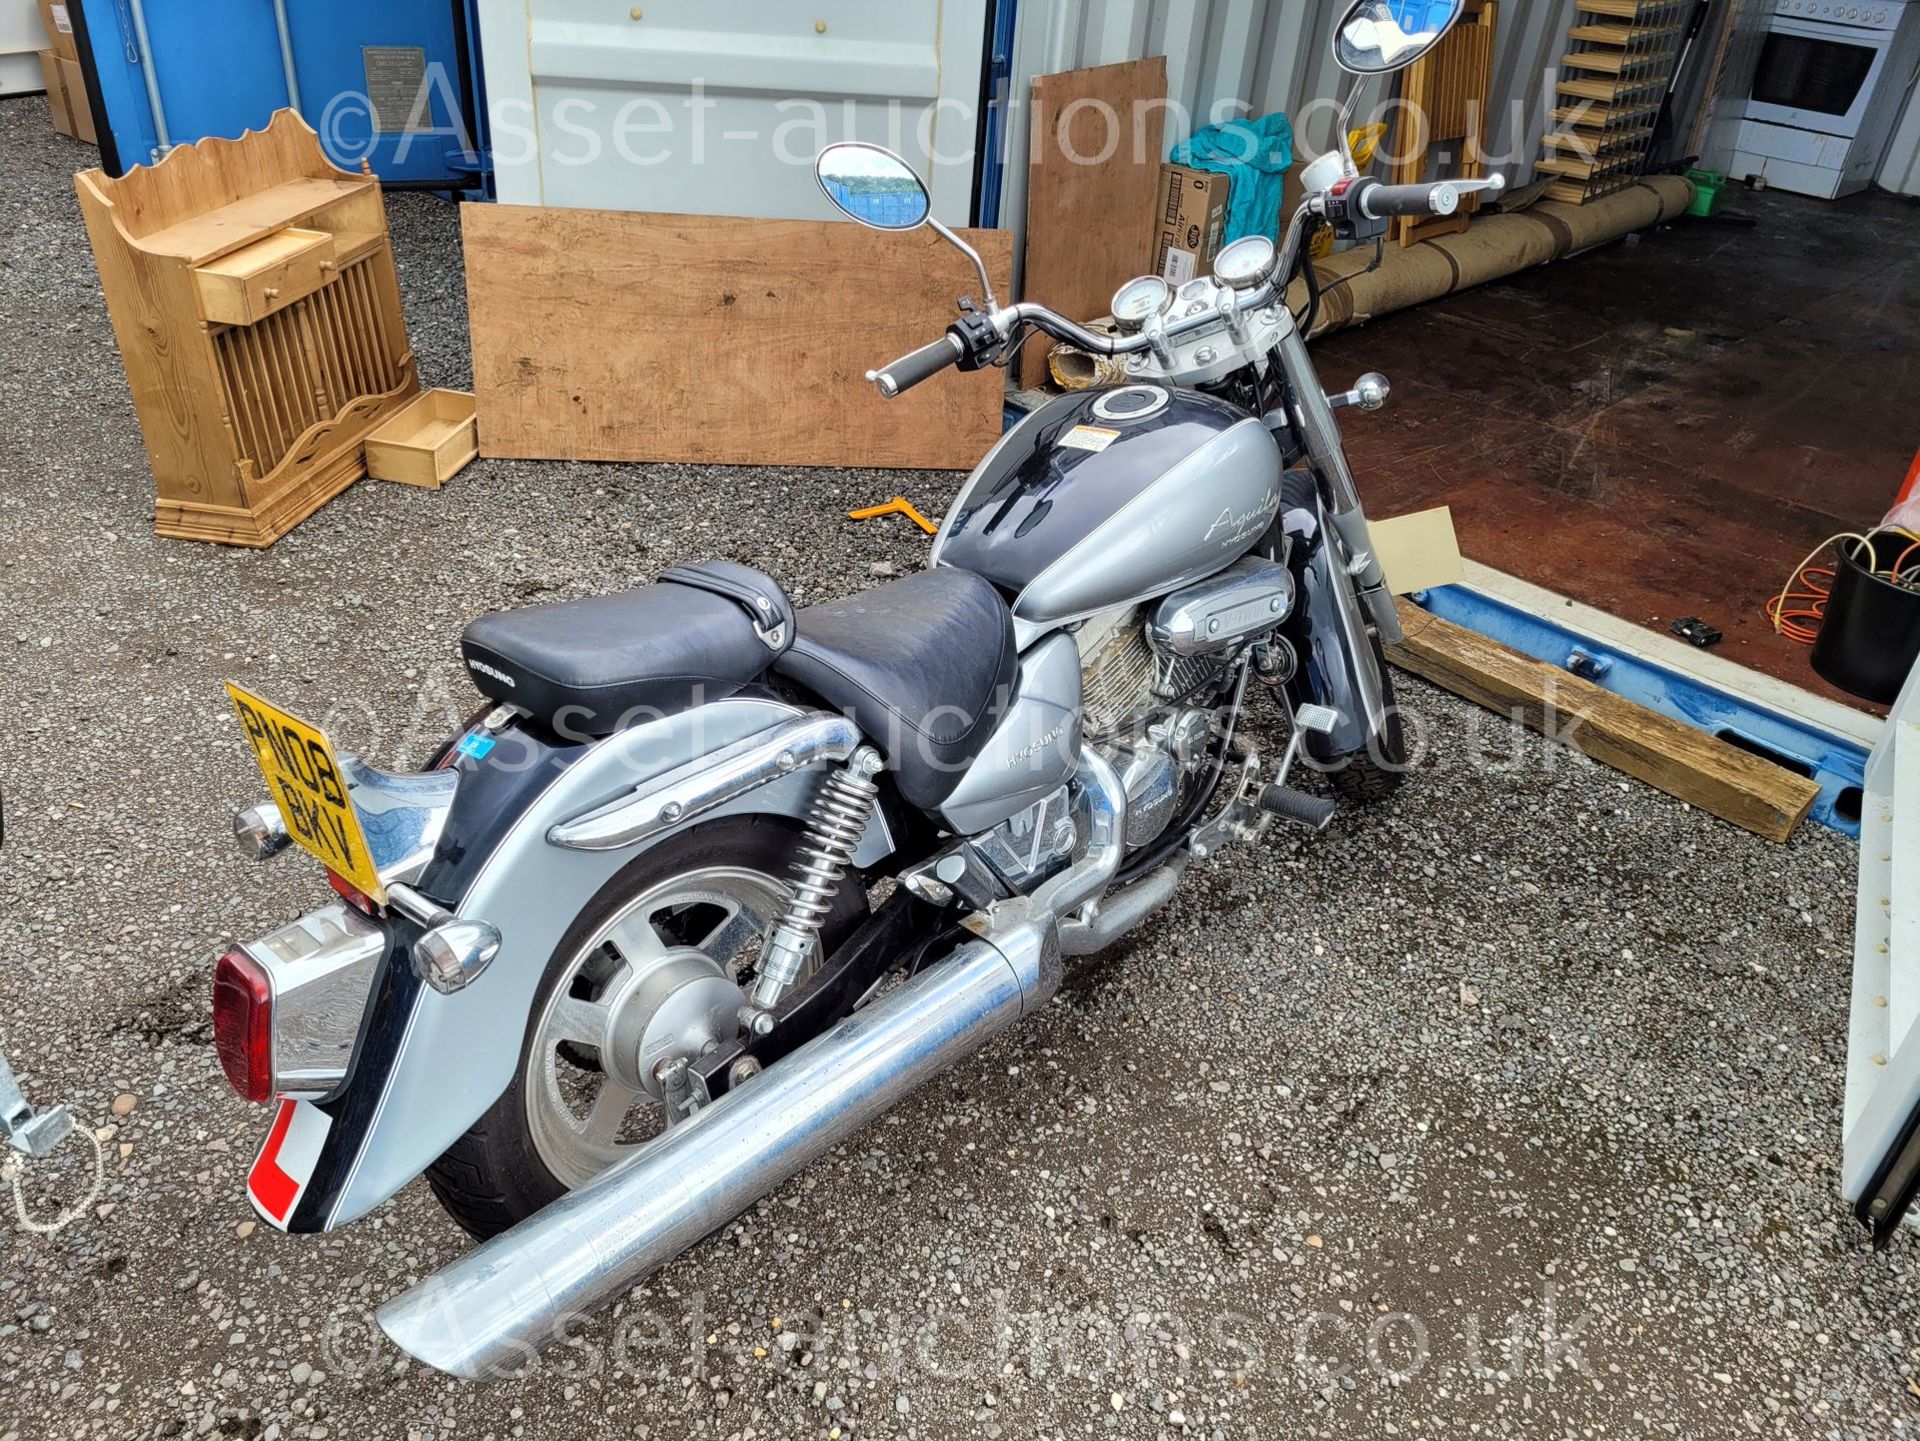 HYOSUNG AQUILA V-TWIN 125CC ONLY 1677 MILES, VERY LOW MILEAGE IN GOOD CONDITION WITH LIKE NEW TYRES - Image 2 of 4